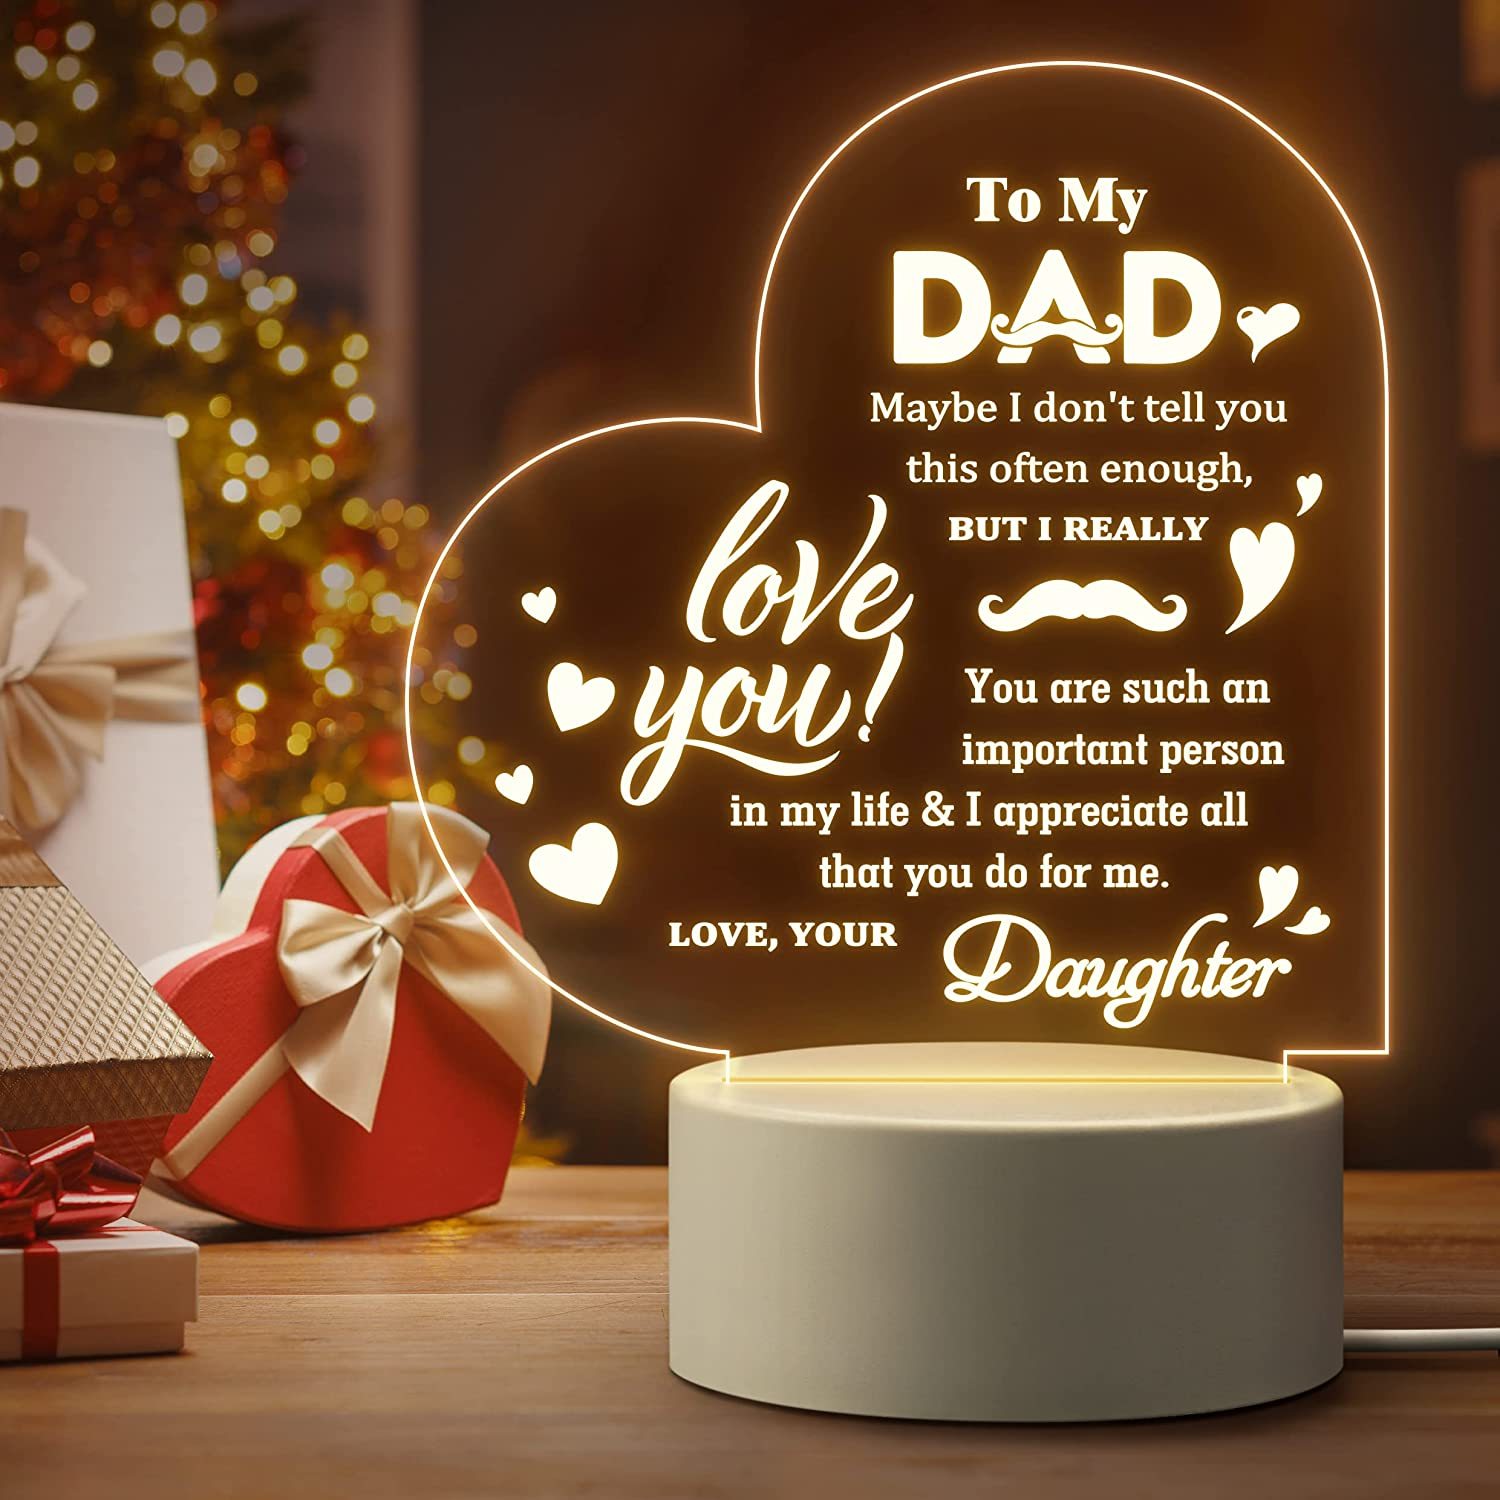 

1pc Heart-shaped Acrylic Night Light With Led Base, Modern "to My Dad" Sentimental Message, Perfect Father's Day, Birthday, Valentine's, Christmas Gift, Usb Powered Desk Lamp, From Daughter To Dad